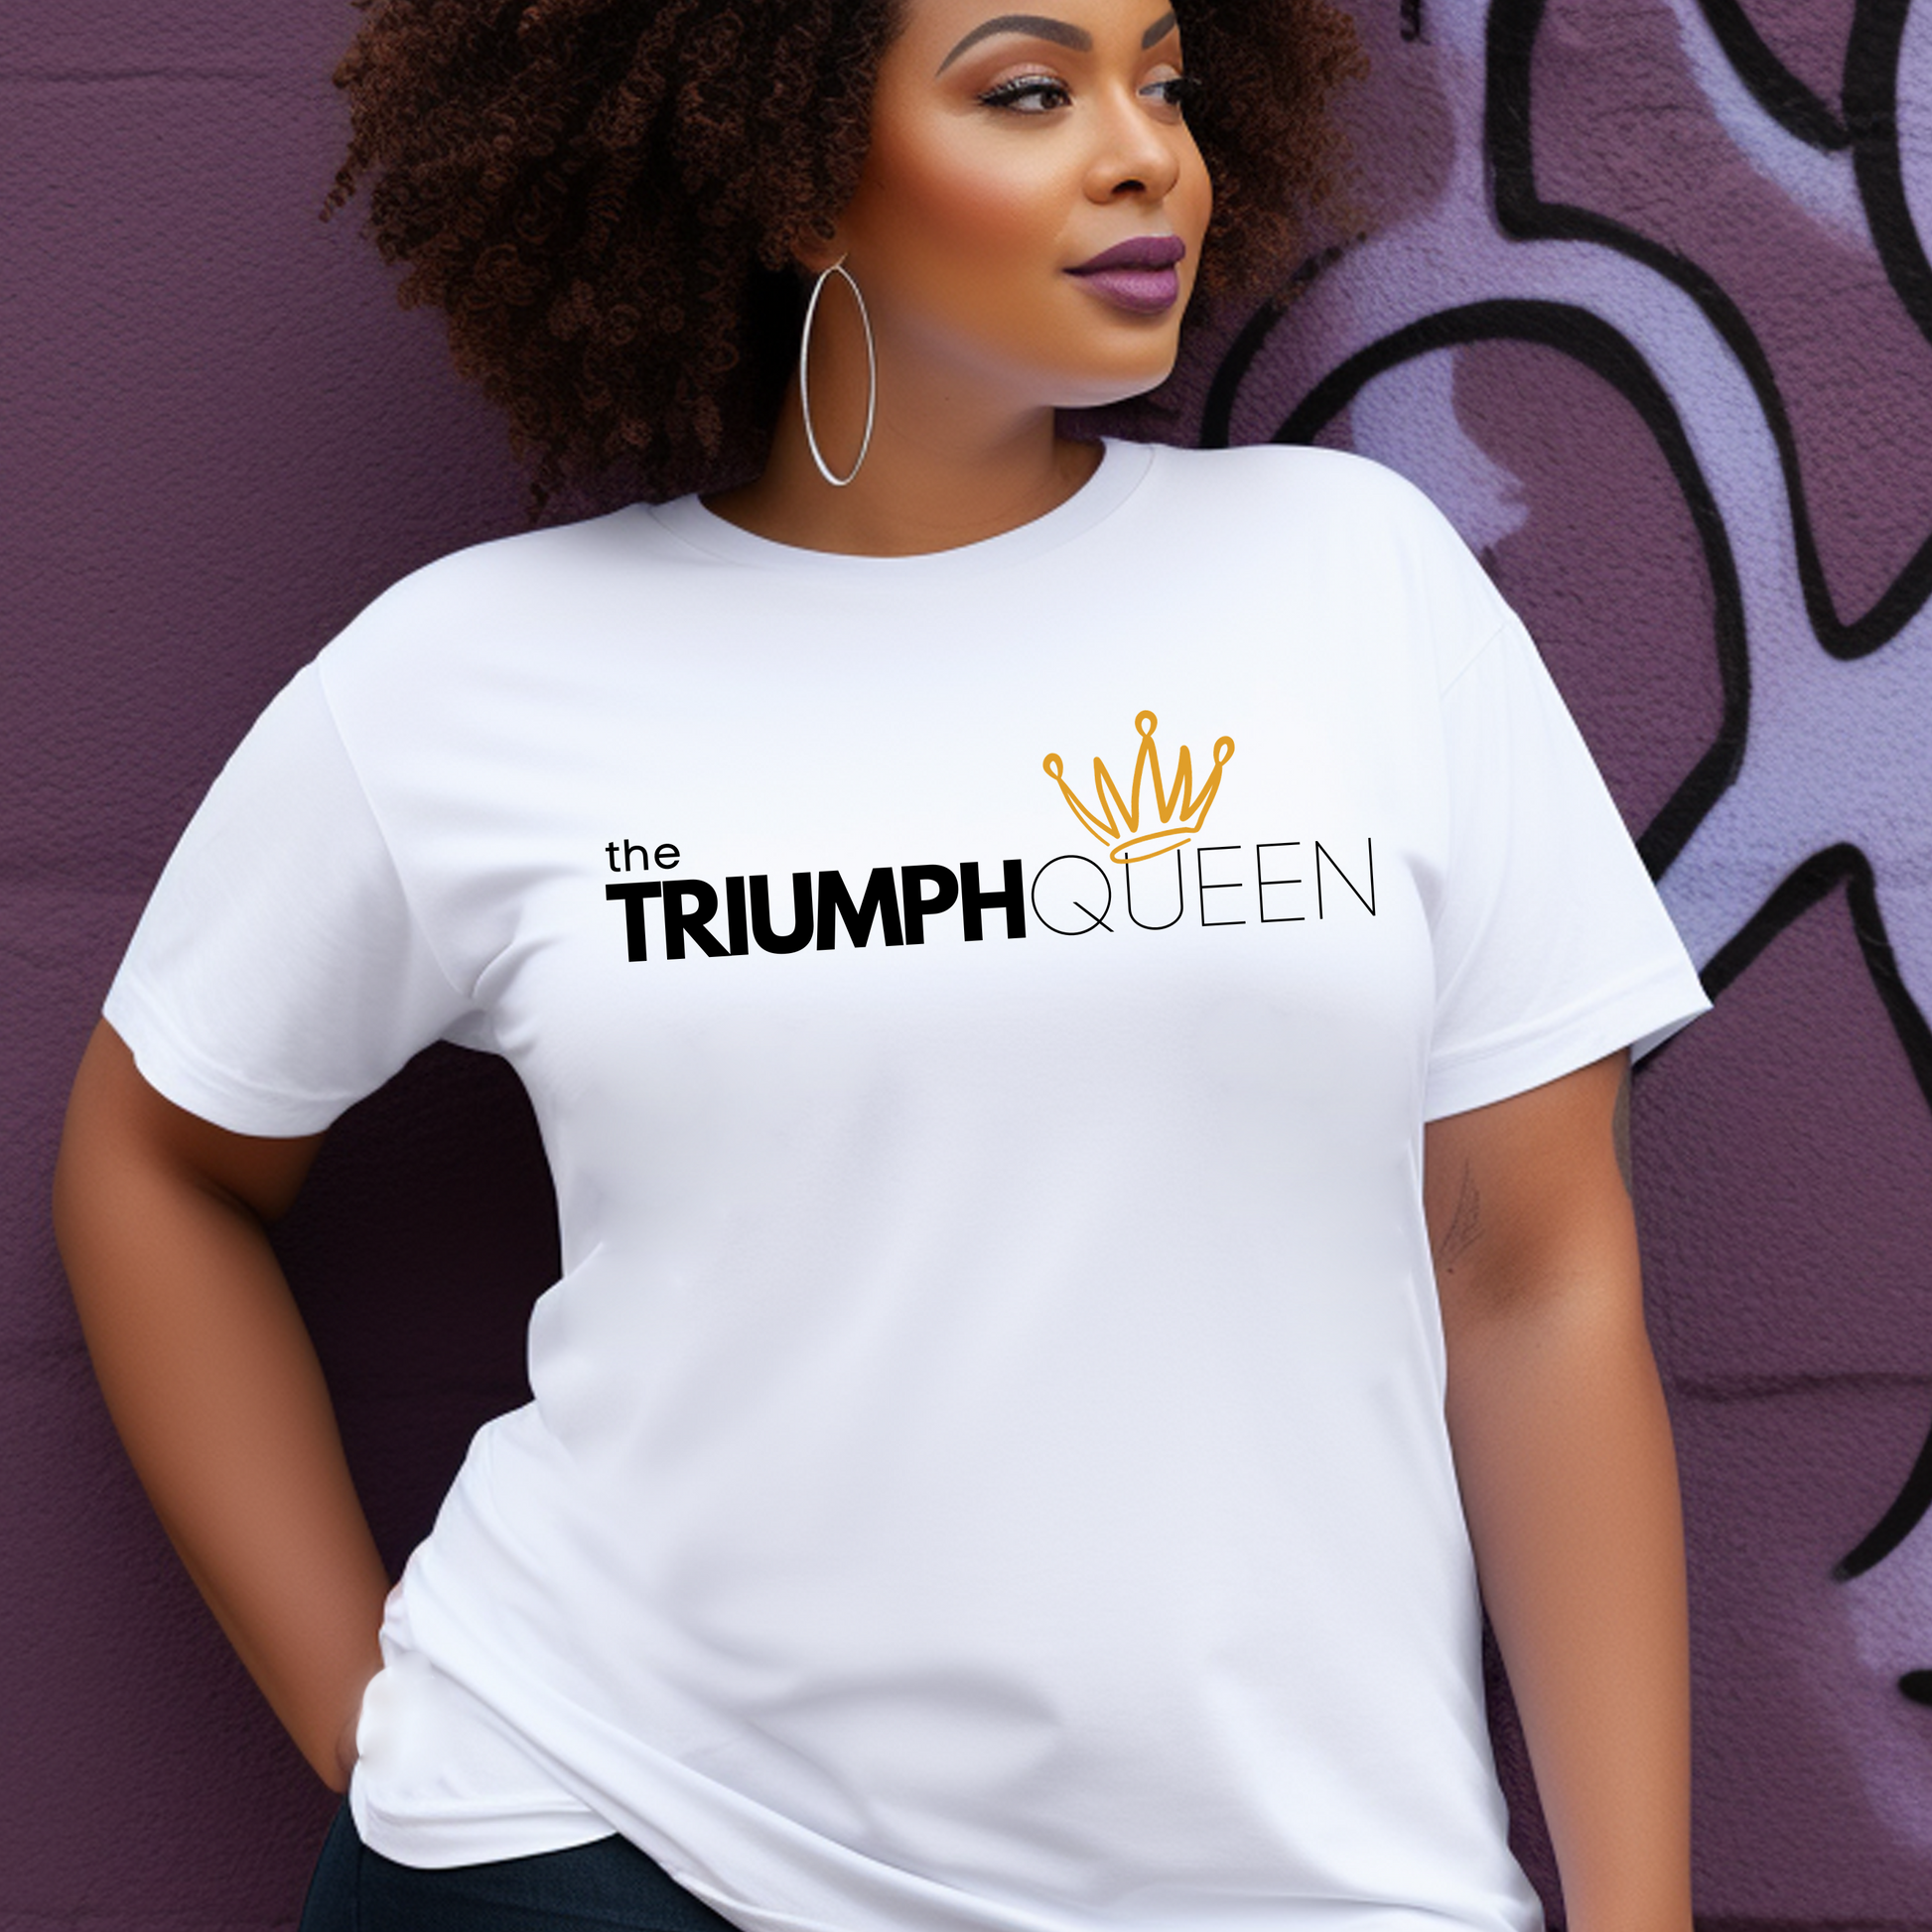 White Triumph Queen T-shirt from Triumph Tees, a faith-based clothing brand. This premium Christian t-shirt displays a bold statement in the centre, embodying faith and empowerment. Ideal for those seeking elegant faith apparel.